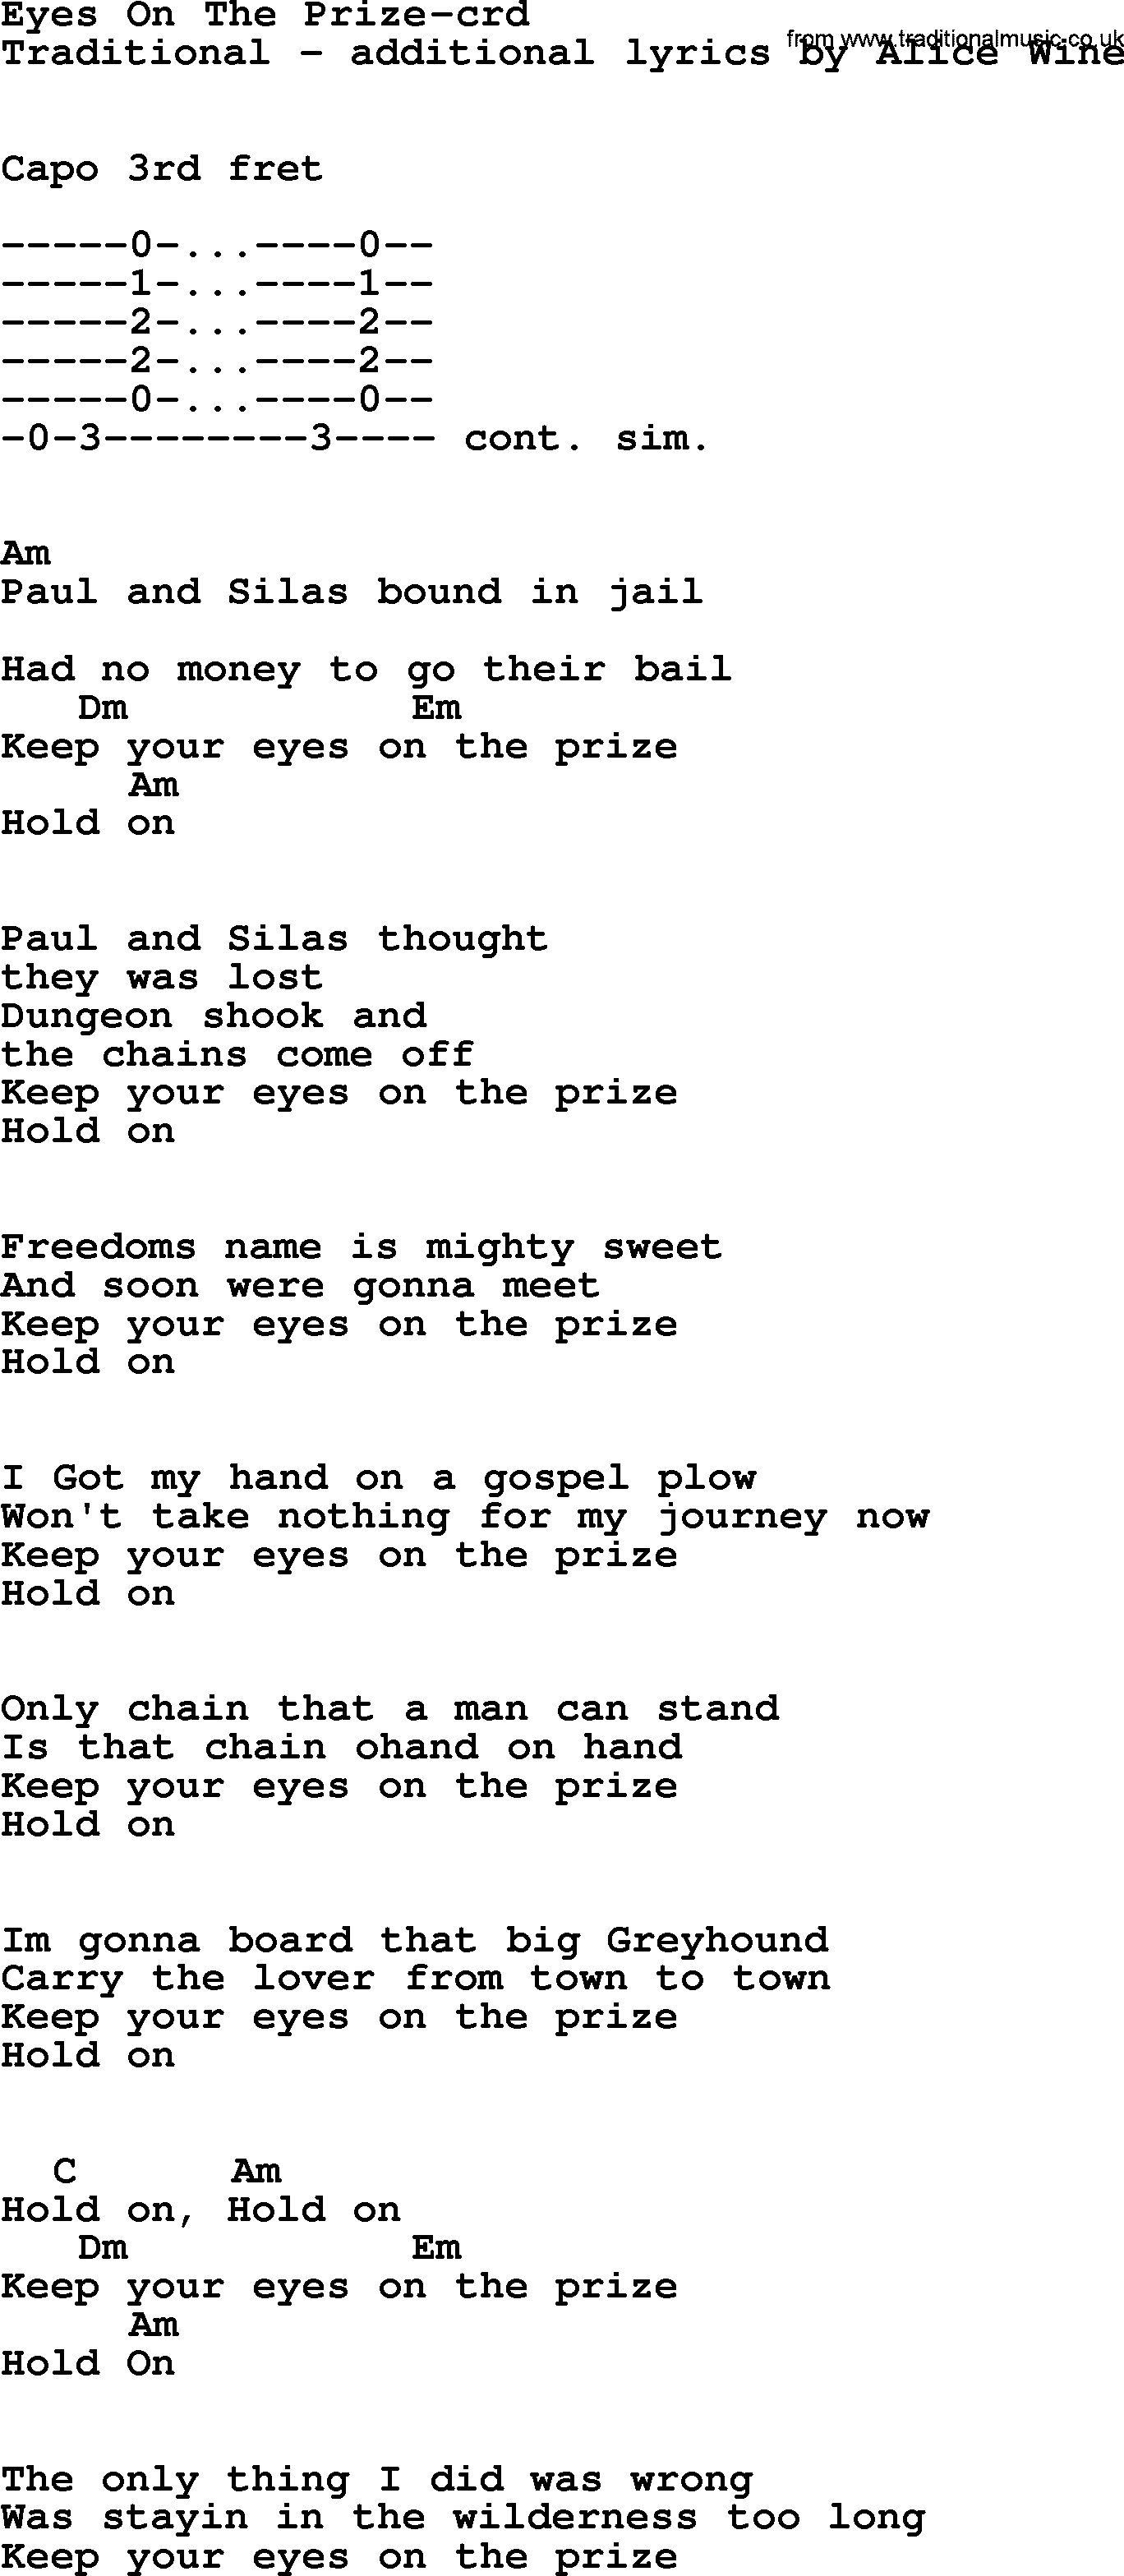 Bruce Springsteen song: Eyes On The Prize, lyrics and chords